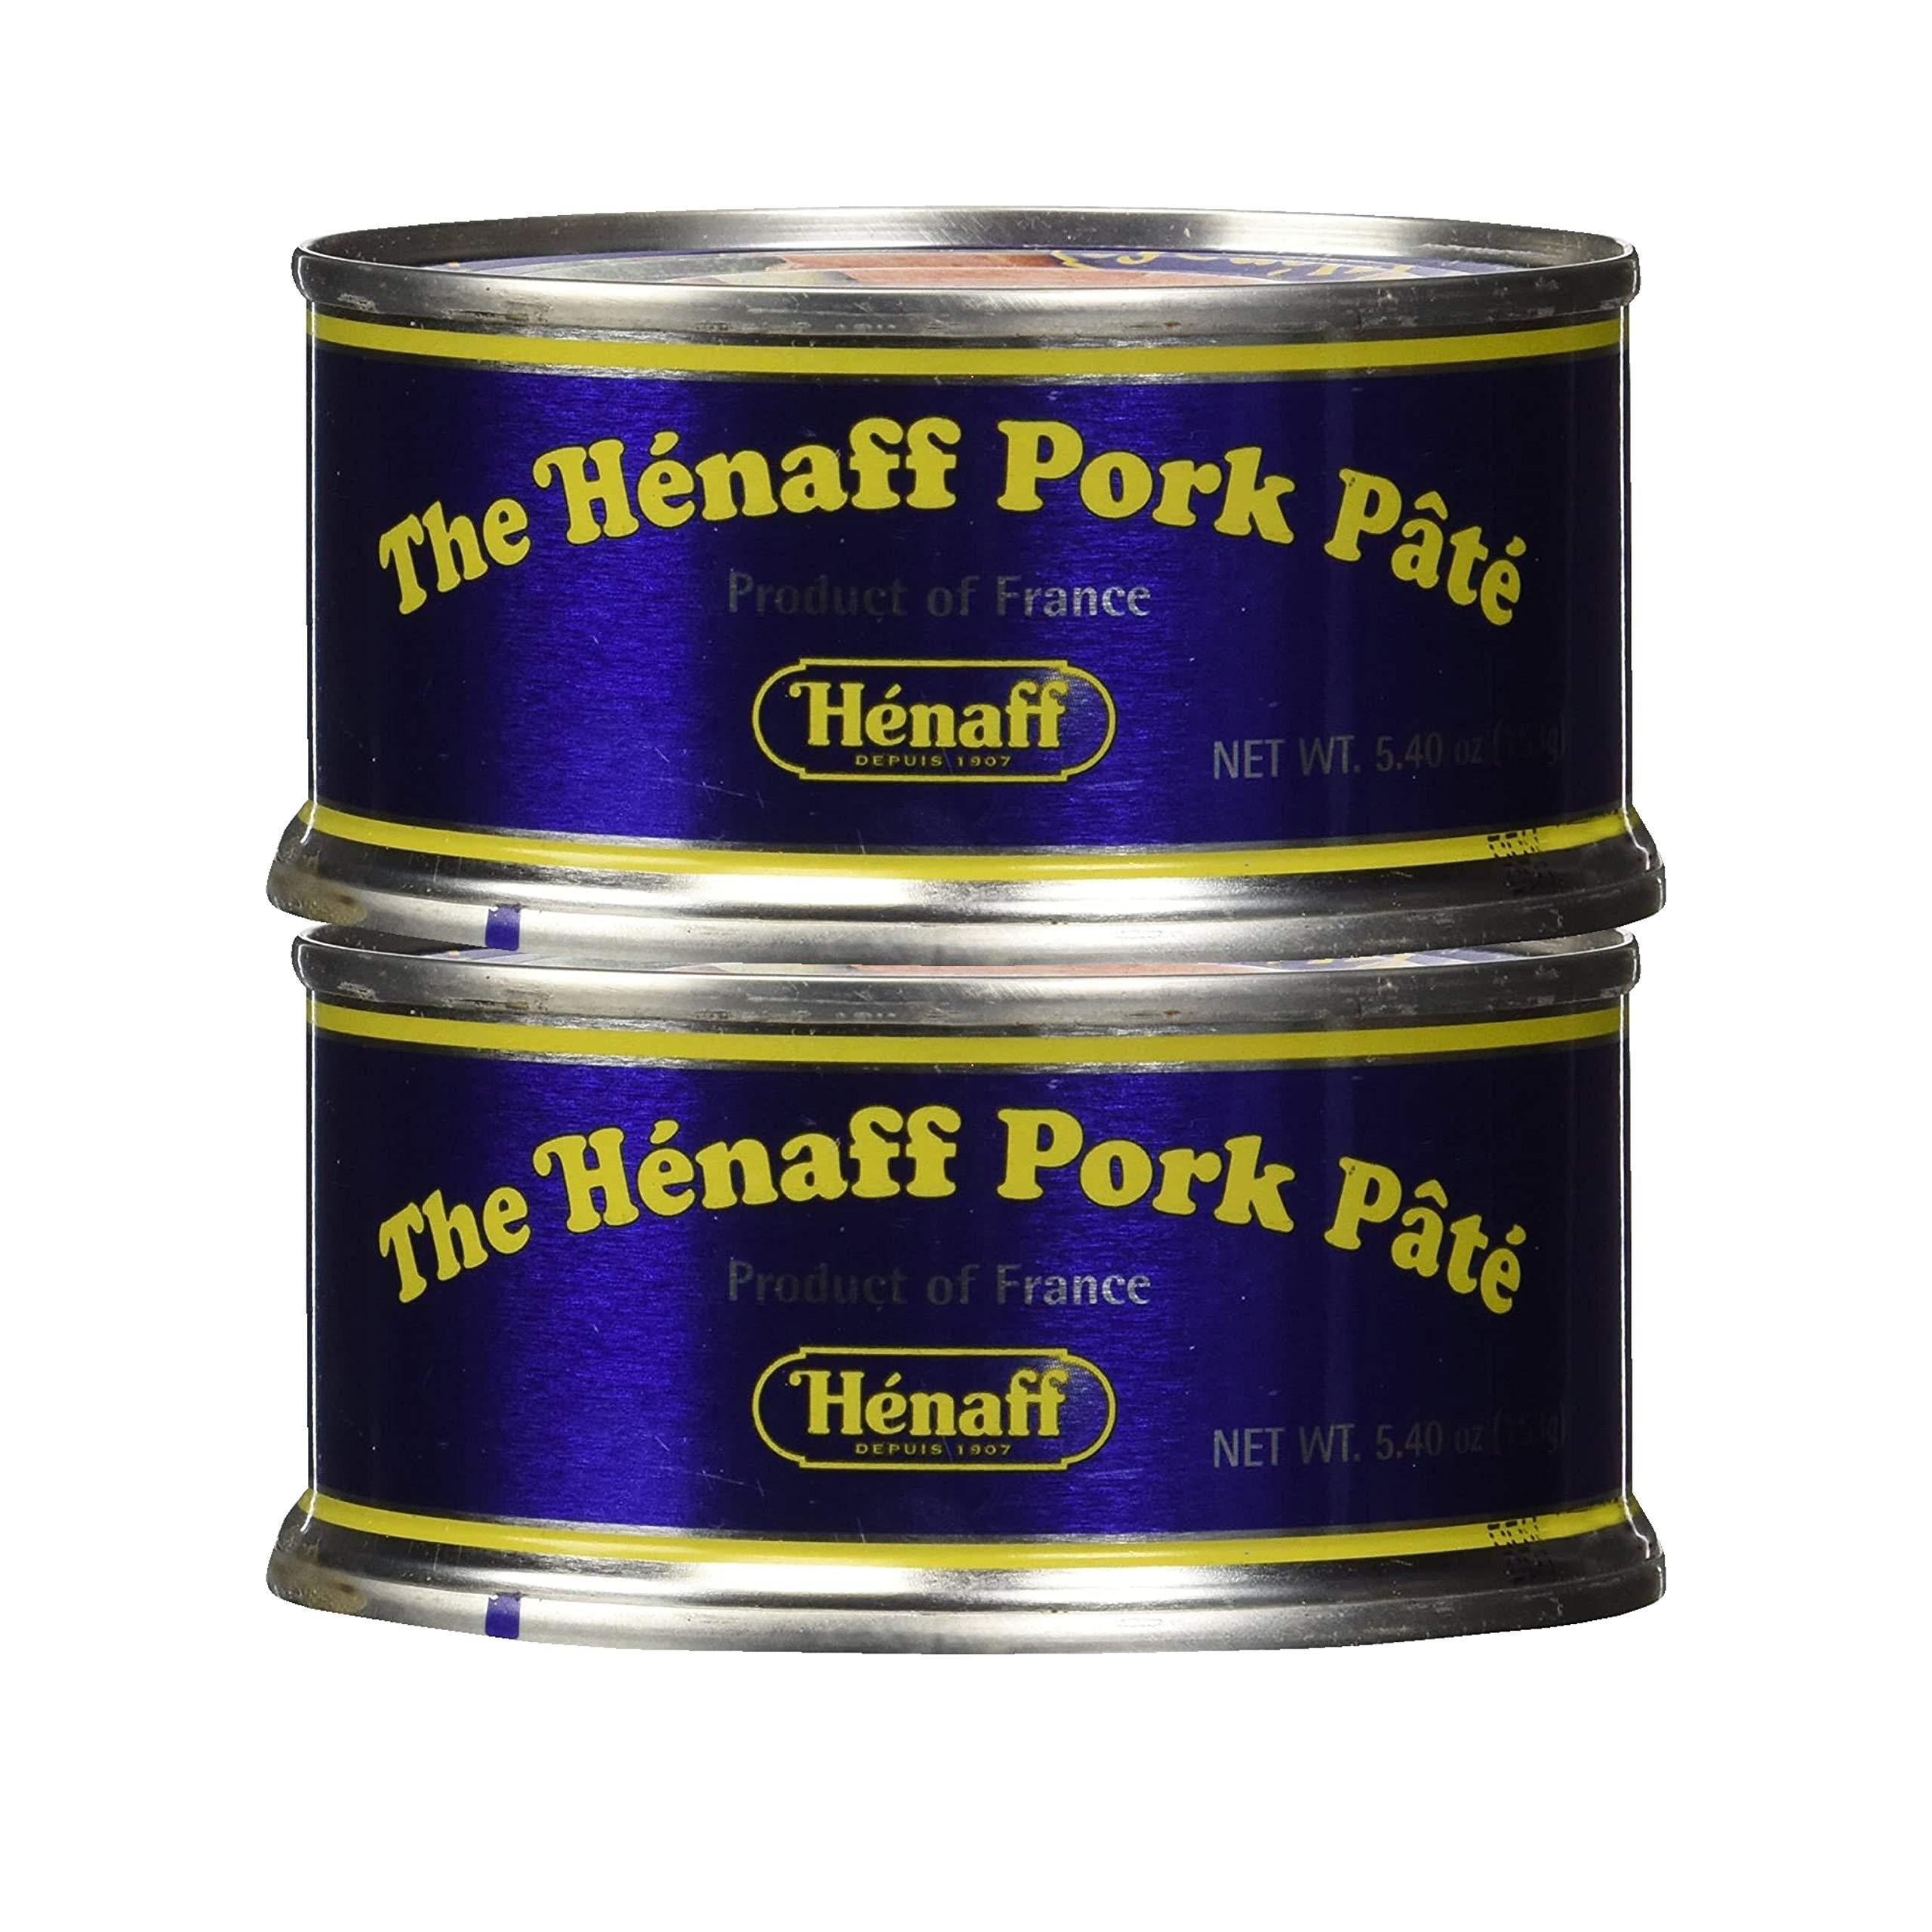 Henaff French Imported Pork Pate (2 Pack, Total of 10.8oz)